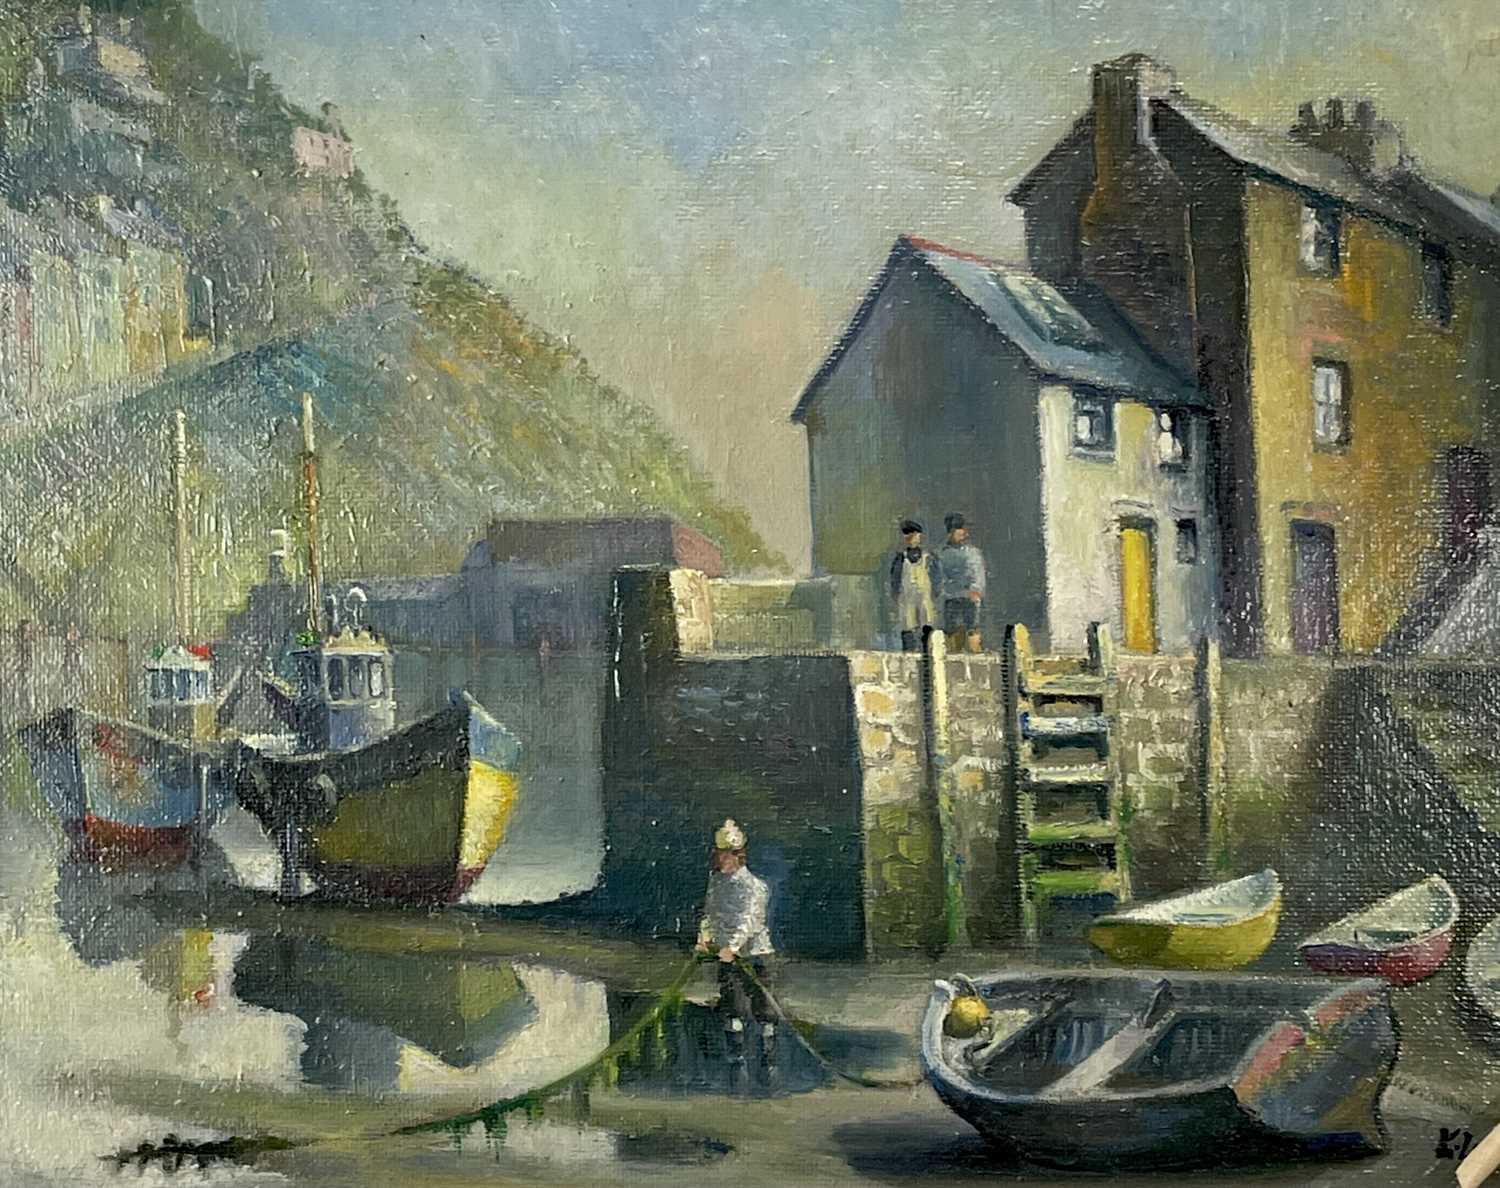 Ken LEECH (XX) Polperro - afternoon in early spring Oil on board Signed and inscribed verso 59 x